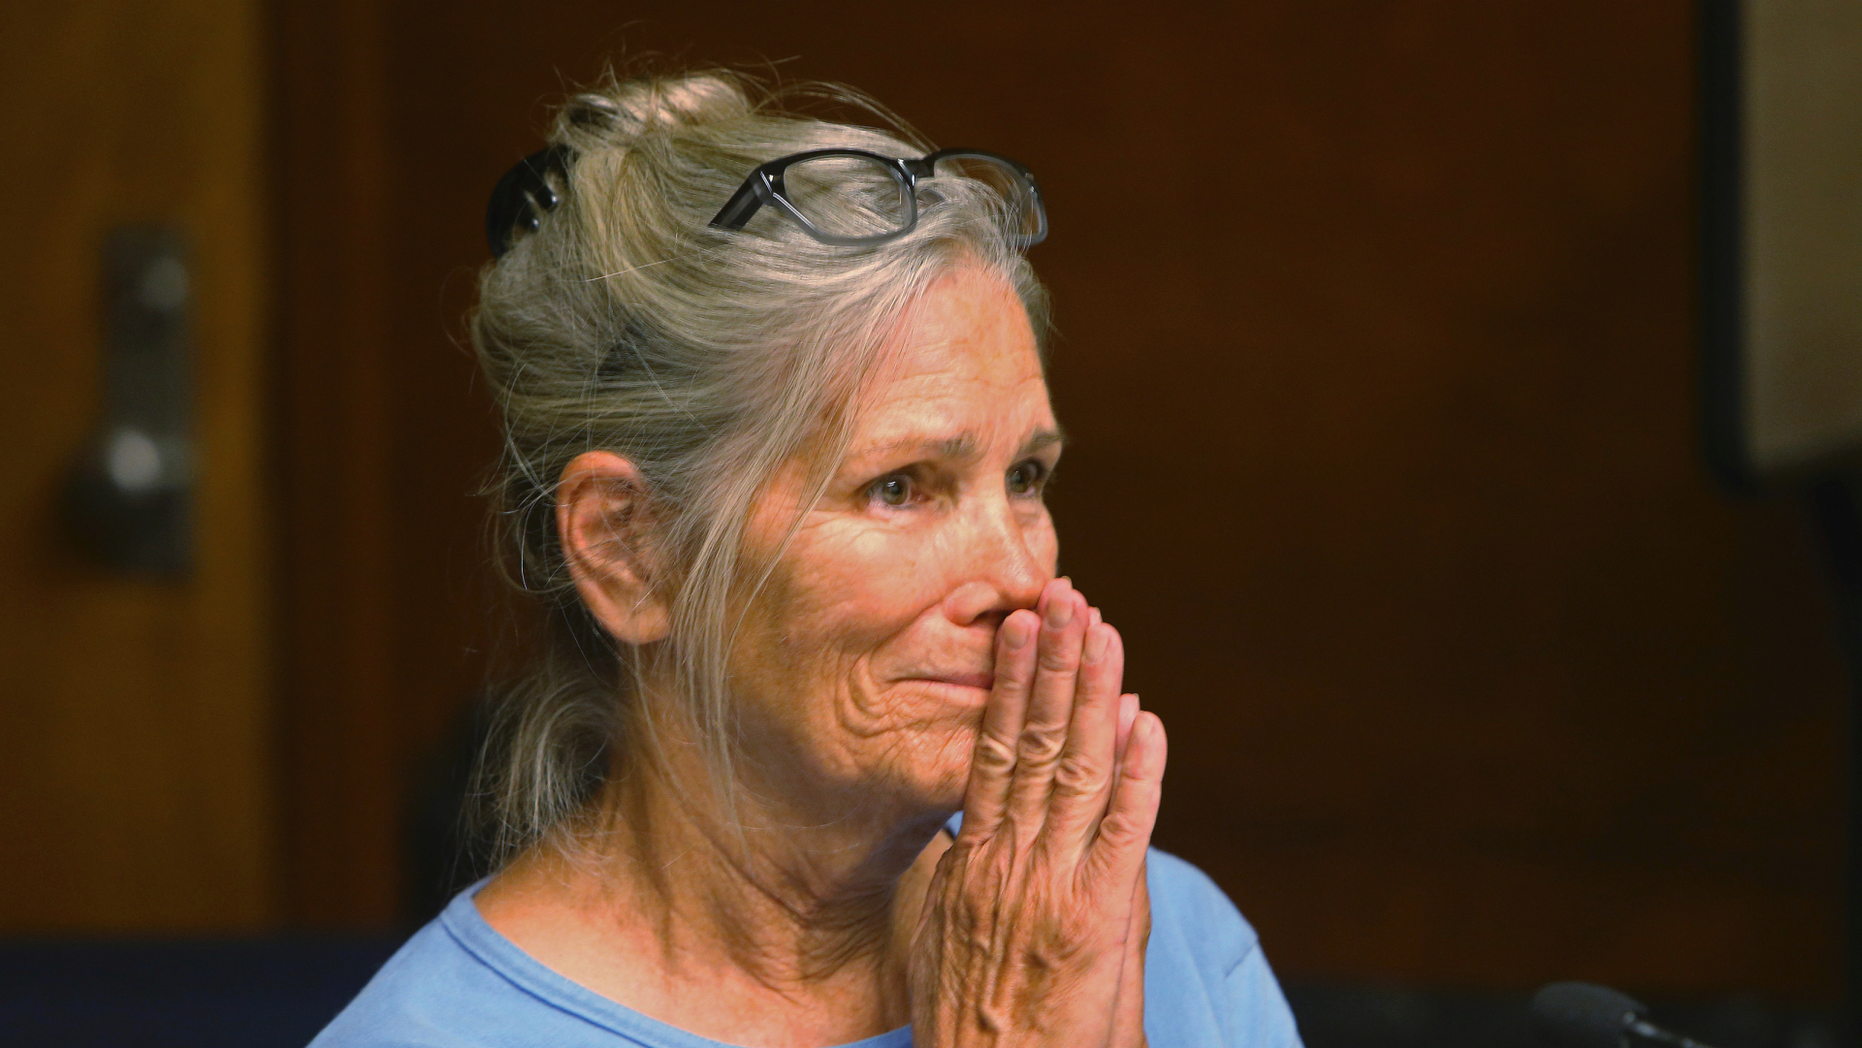 DOSSIER - In this archive photo from September 6, 2017, Leslie Van Houten reacts after learning that she was eligible for parole at a hearing at the California Women's Institution. in Corona, California. A disciple of Charles Manson, Van Houten, has another chance to get out of prison. Van Houten's lawyer will argue that she deserves parole at a hearing before the California Court of Appeal in Los Angeles on Wednesday, April 24, 2019. Van Houten, 69, is not expected herself. (Stan Lim / Los Angeles Daily News via AP, Pool, File)